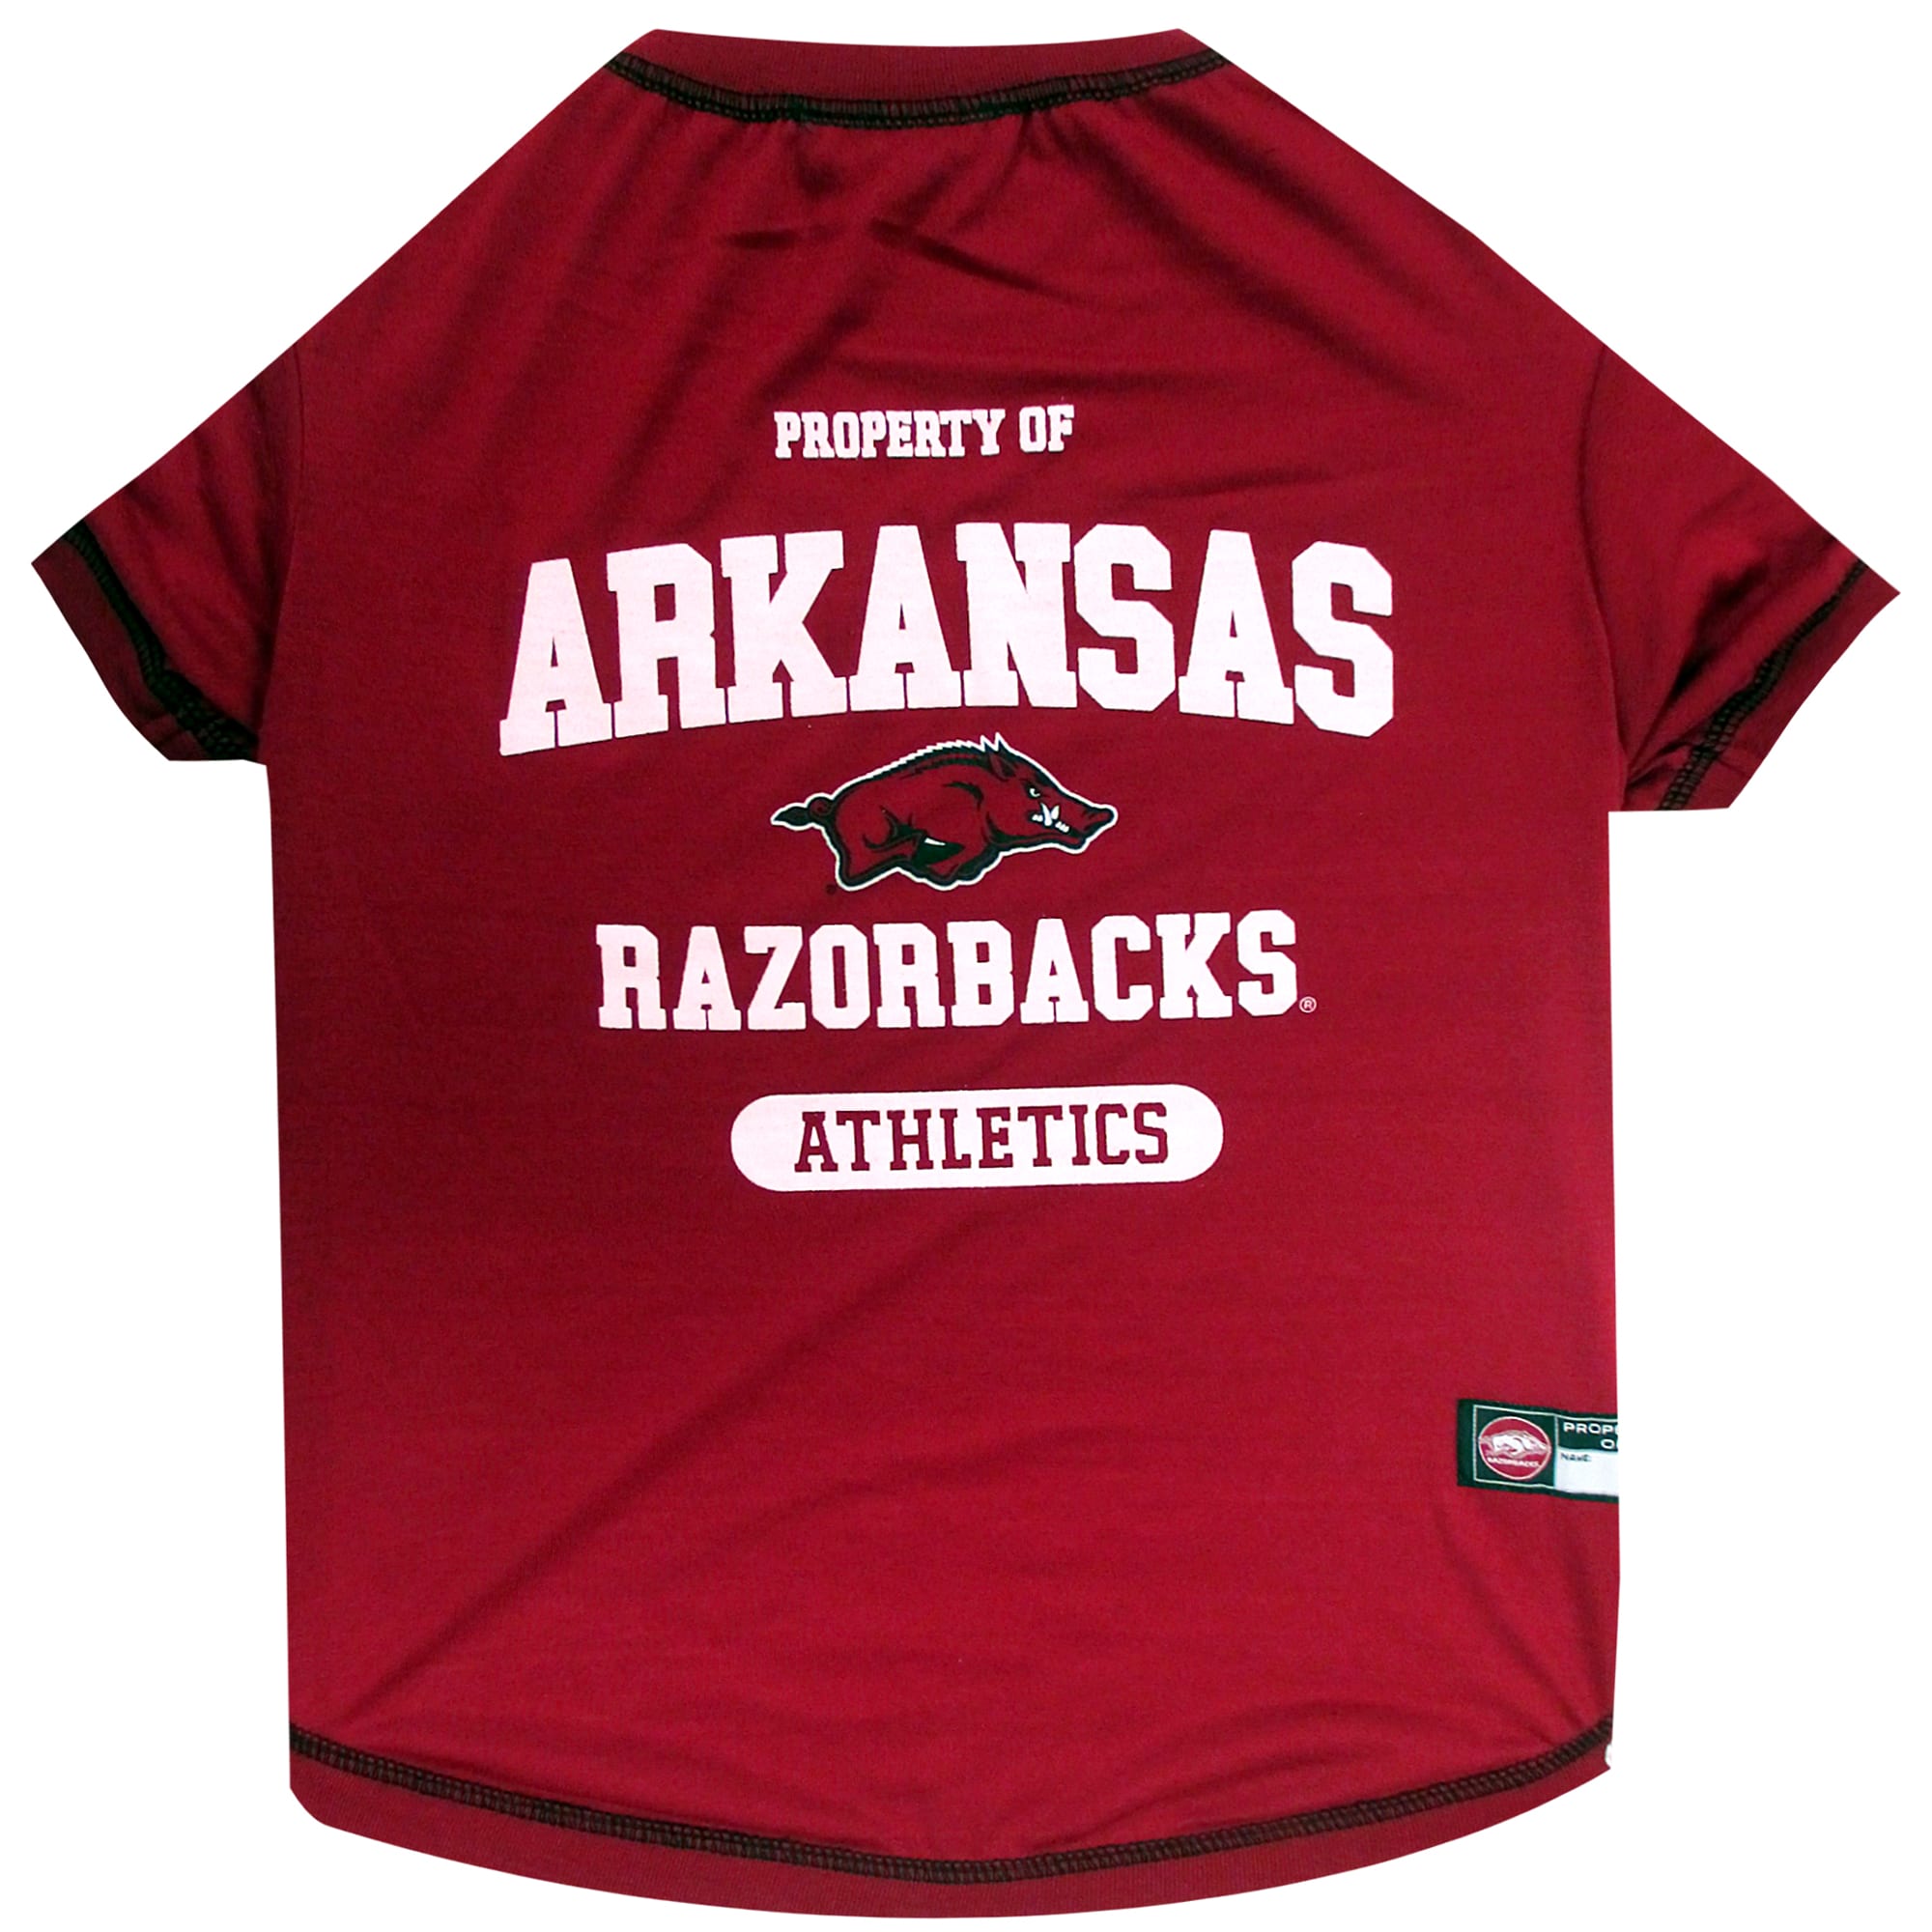 Pets First Collegiate Arkansas Razorbacks Pet Dog Sweater - Licensed 100%  Warm Acrylic knitted. 44 College Teams, 4 sizes 